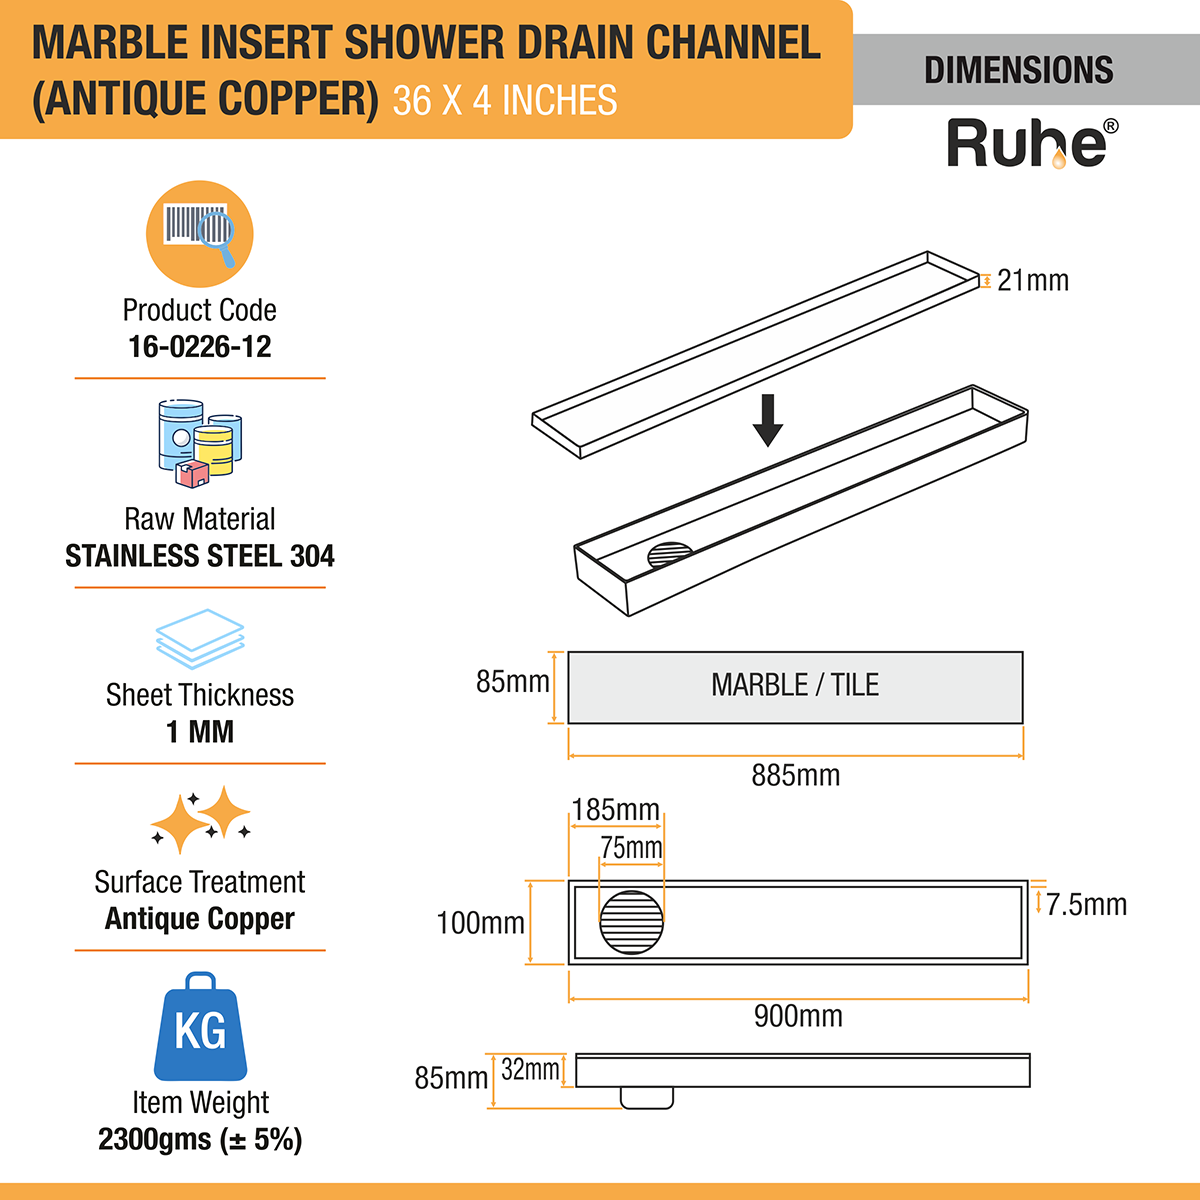 Marble Insert Shower Drain Channel (36 x 4 Inches) ROSE GOLD PVD Coated dimensions and sizes